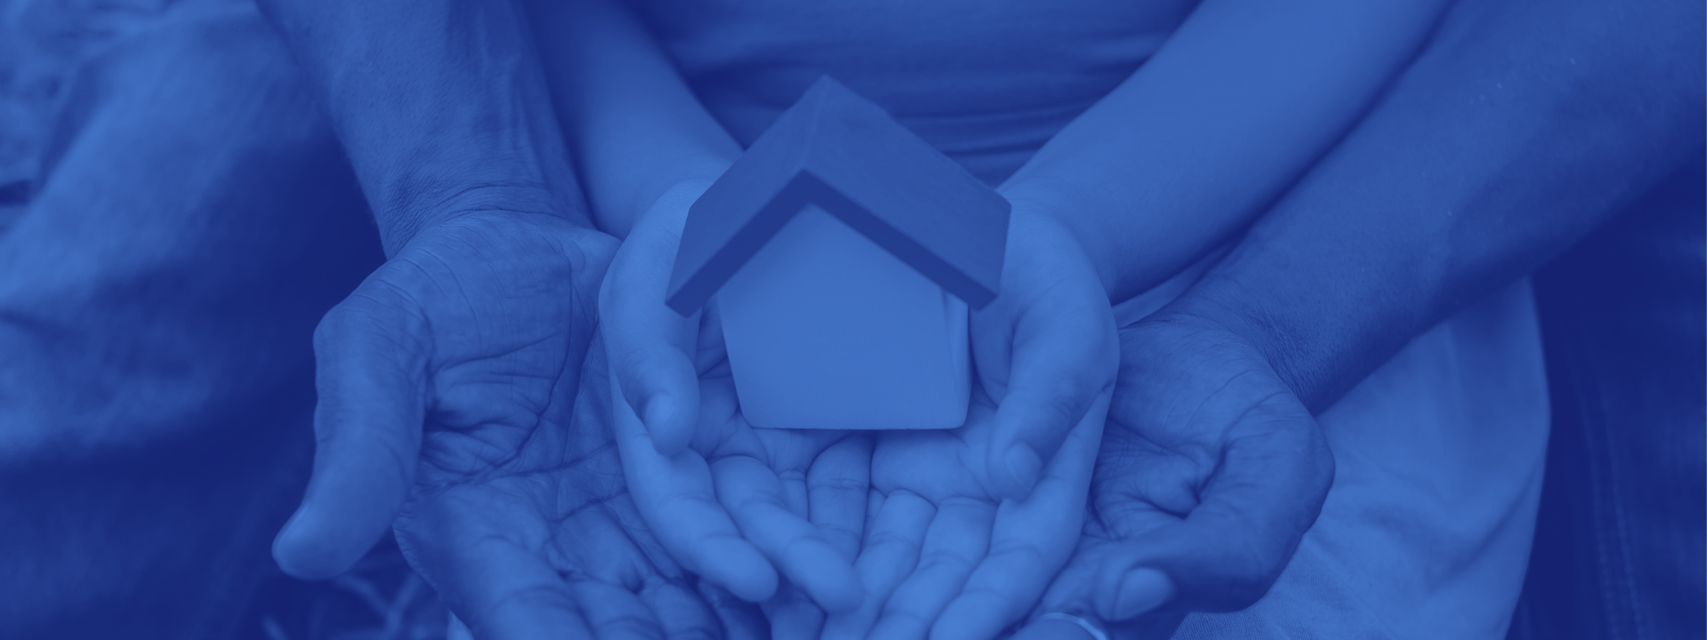 Header banner - image of hands holding toy house